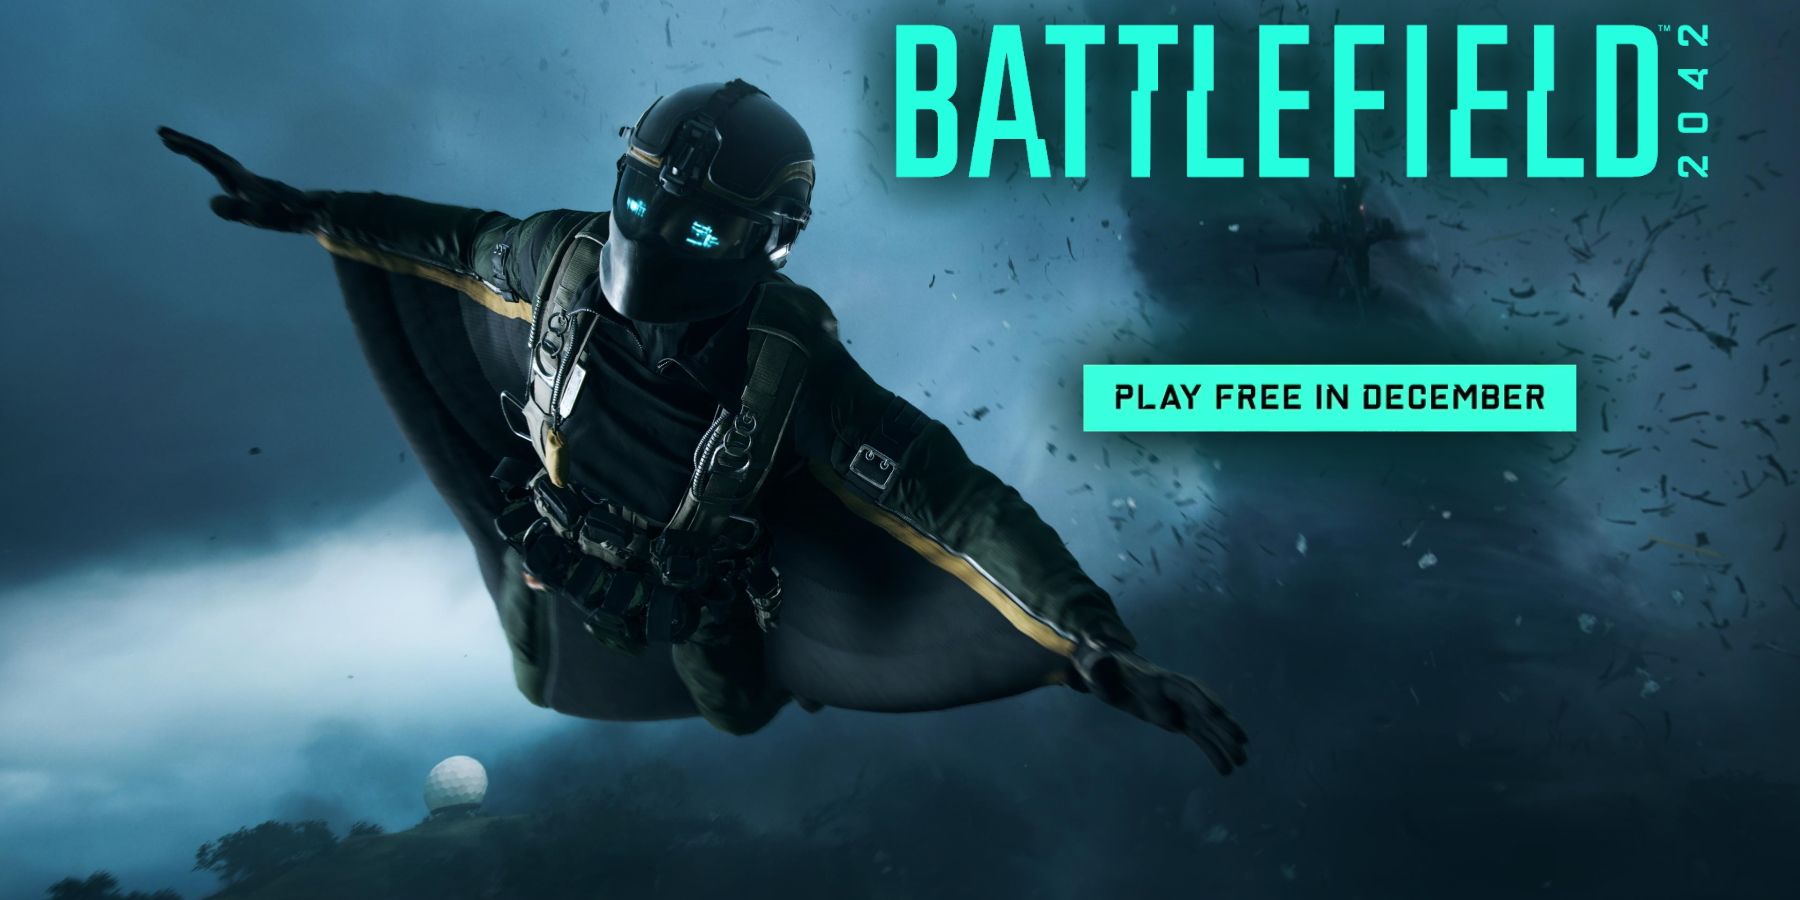 Will Battlefield 2042 Be Free to Play?